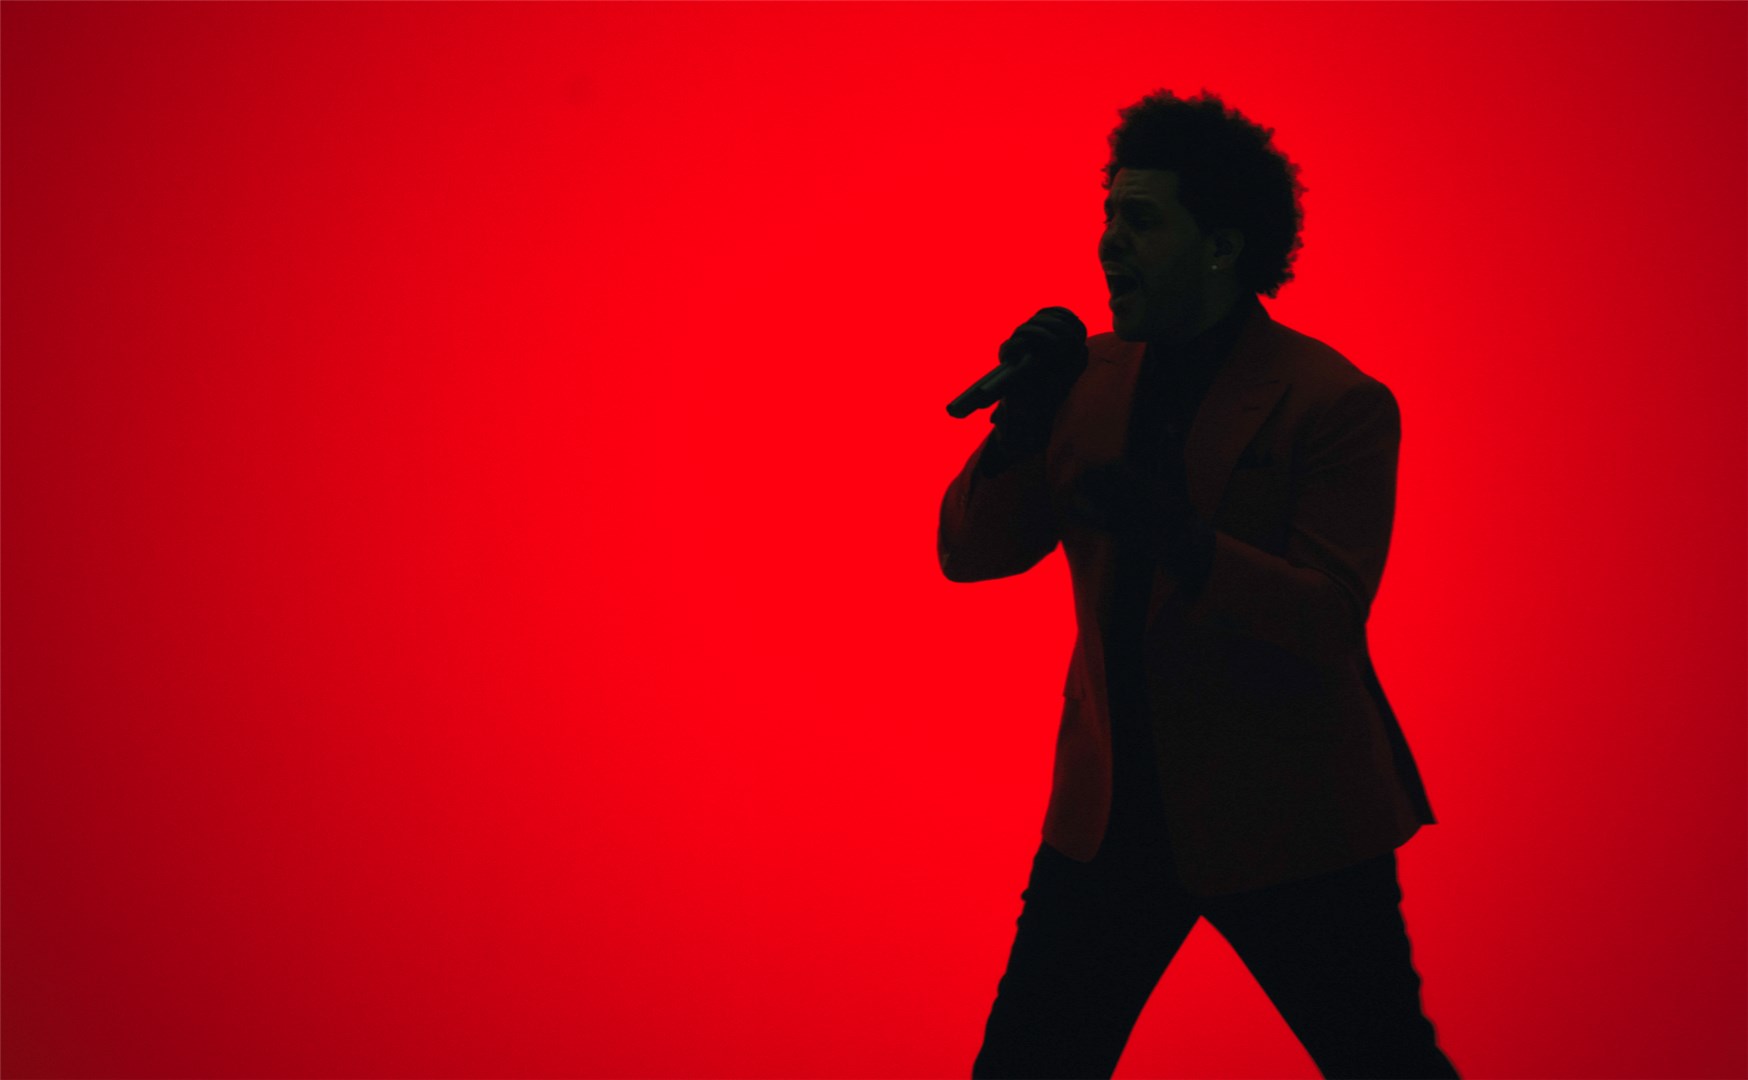 Watch the Weeknd's Live “Alone Again” Video